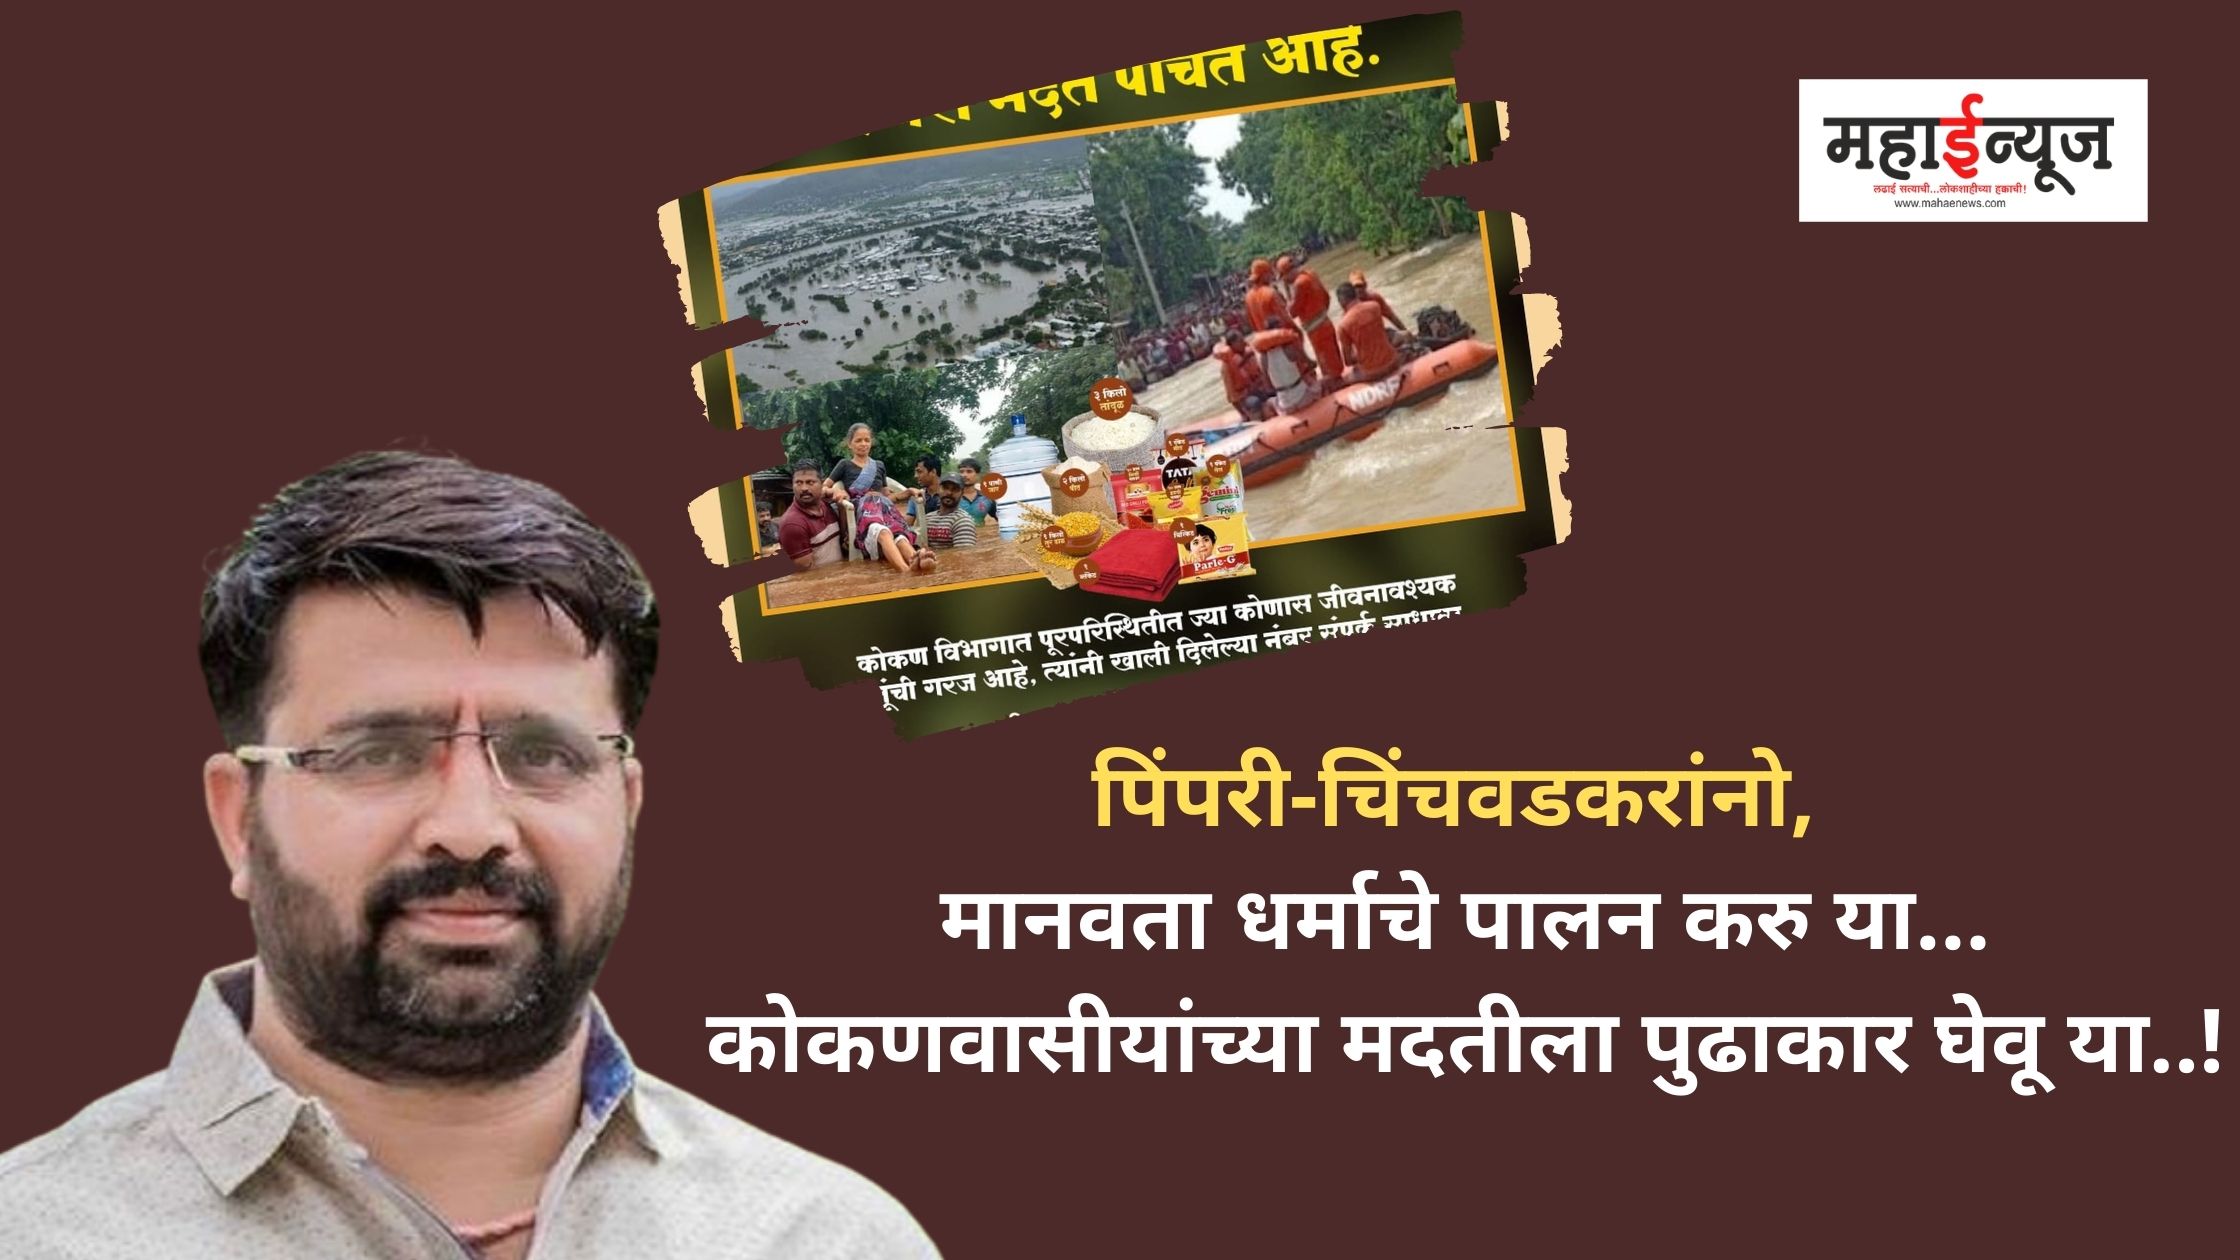 Pimpri-Chinchwadkars, let's follow the religion of humanity, let's take initiative to help the people of Konkan ..!